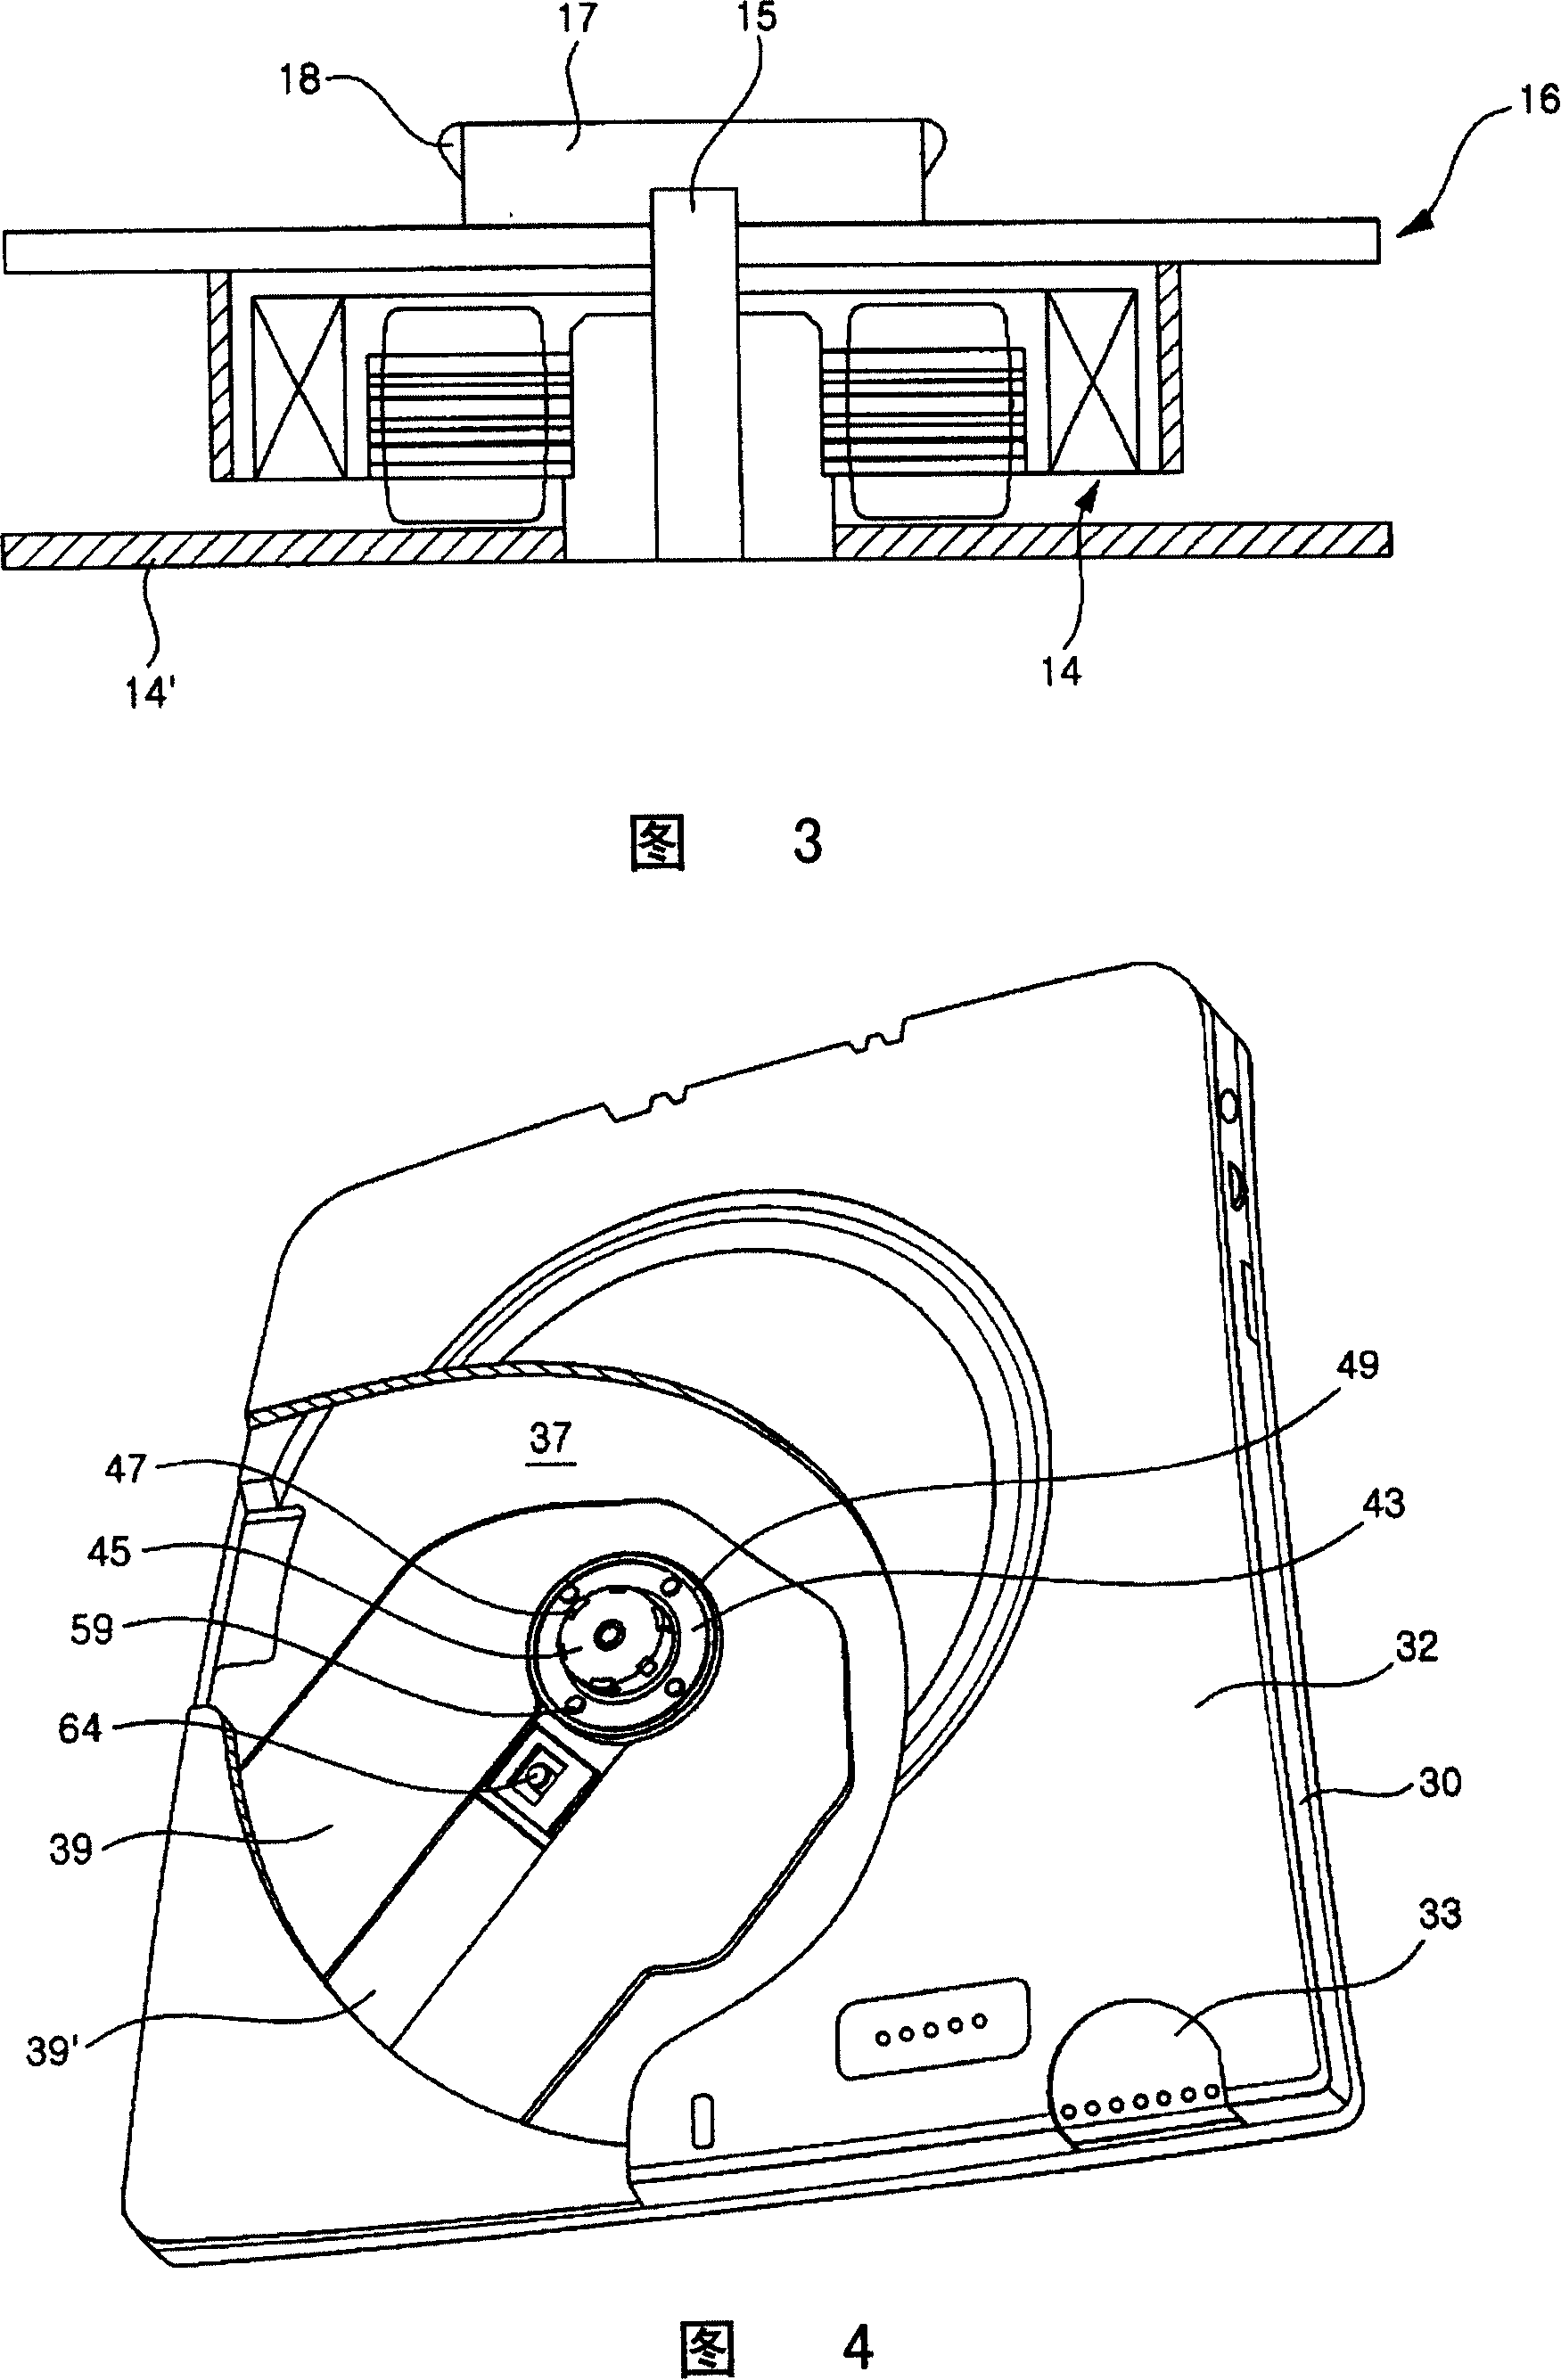 CD separating device for CD driver